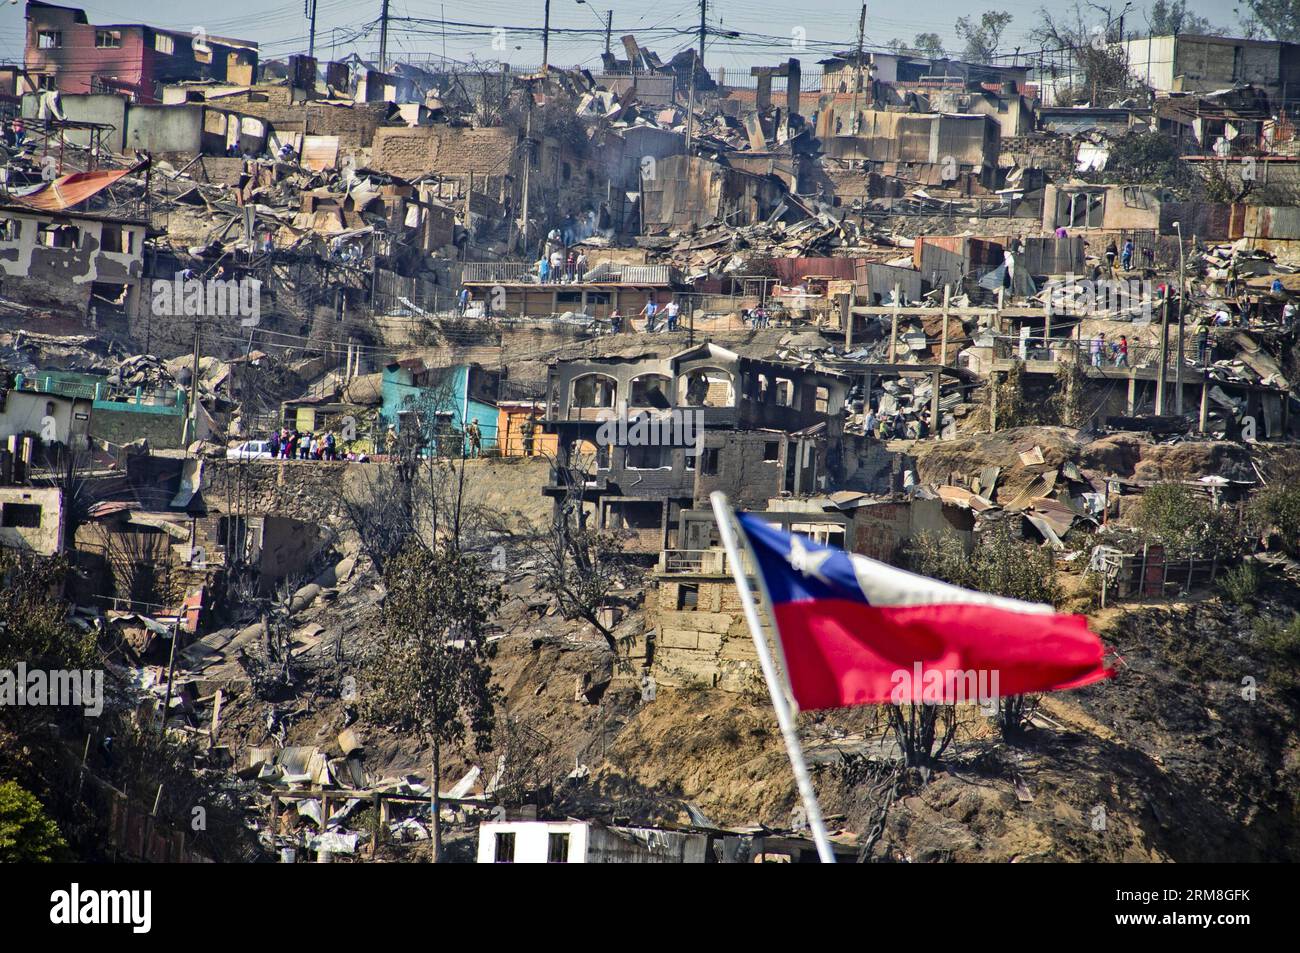 A national flag of Chile waves in front of houses destroyed by a fire in Valparaiso, Chile on April 13, 2014. At least 11 people were killed over the weekend in a massive forest fire that broke out in Chile s port city of Valparaiso, authorities said Sunday. President Michelle Bachelet declared state of emergency in the city and sent the army in to maintain order as thousands of residents were evacuated. (Xinhua/Pablo Ovalle/AGENCIA UNO) CHILE-VALPARAISO-FIRE PUBLICATIONxNOTxINxCHN   a National Flag of Chile Waves in Front of Houses destroyed by a Fire in Valparaiso Chile ON April 13 2014 AT l Stock Photo